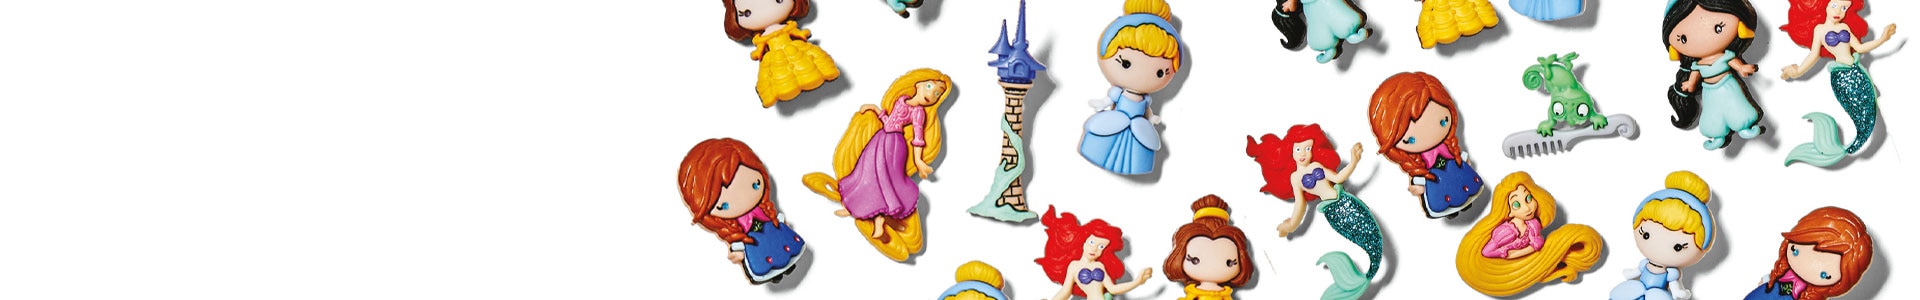 Add your favorite characters to apparel & craft projects with these colorful licensed character & Disney buttons.